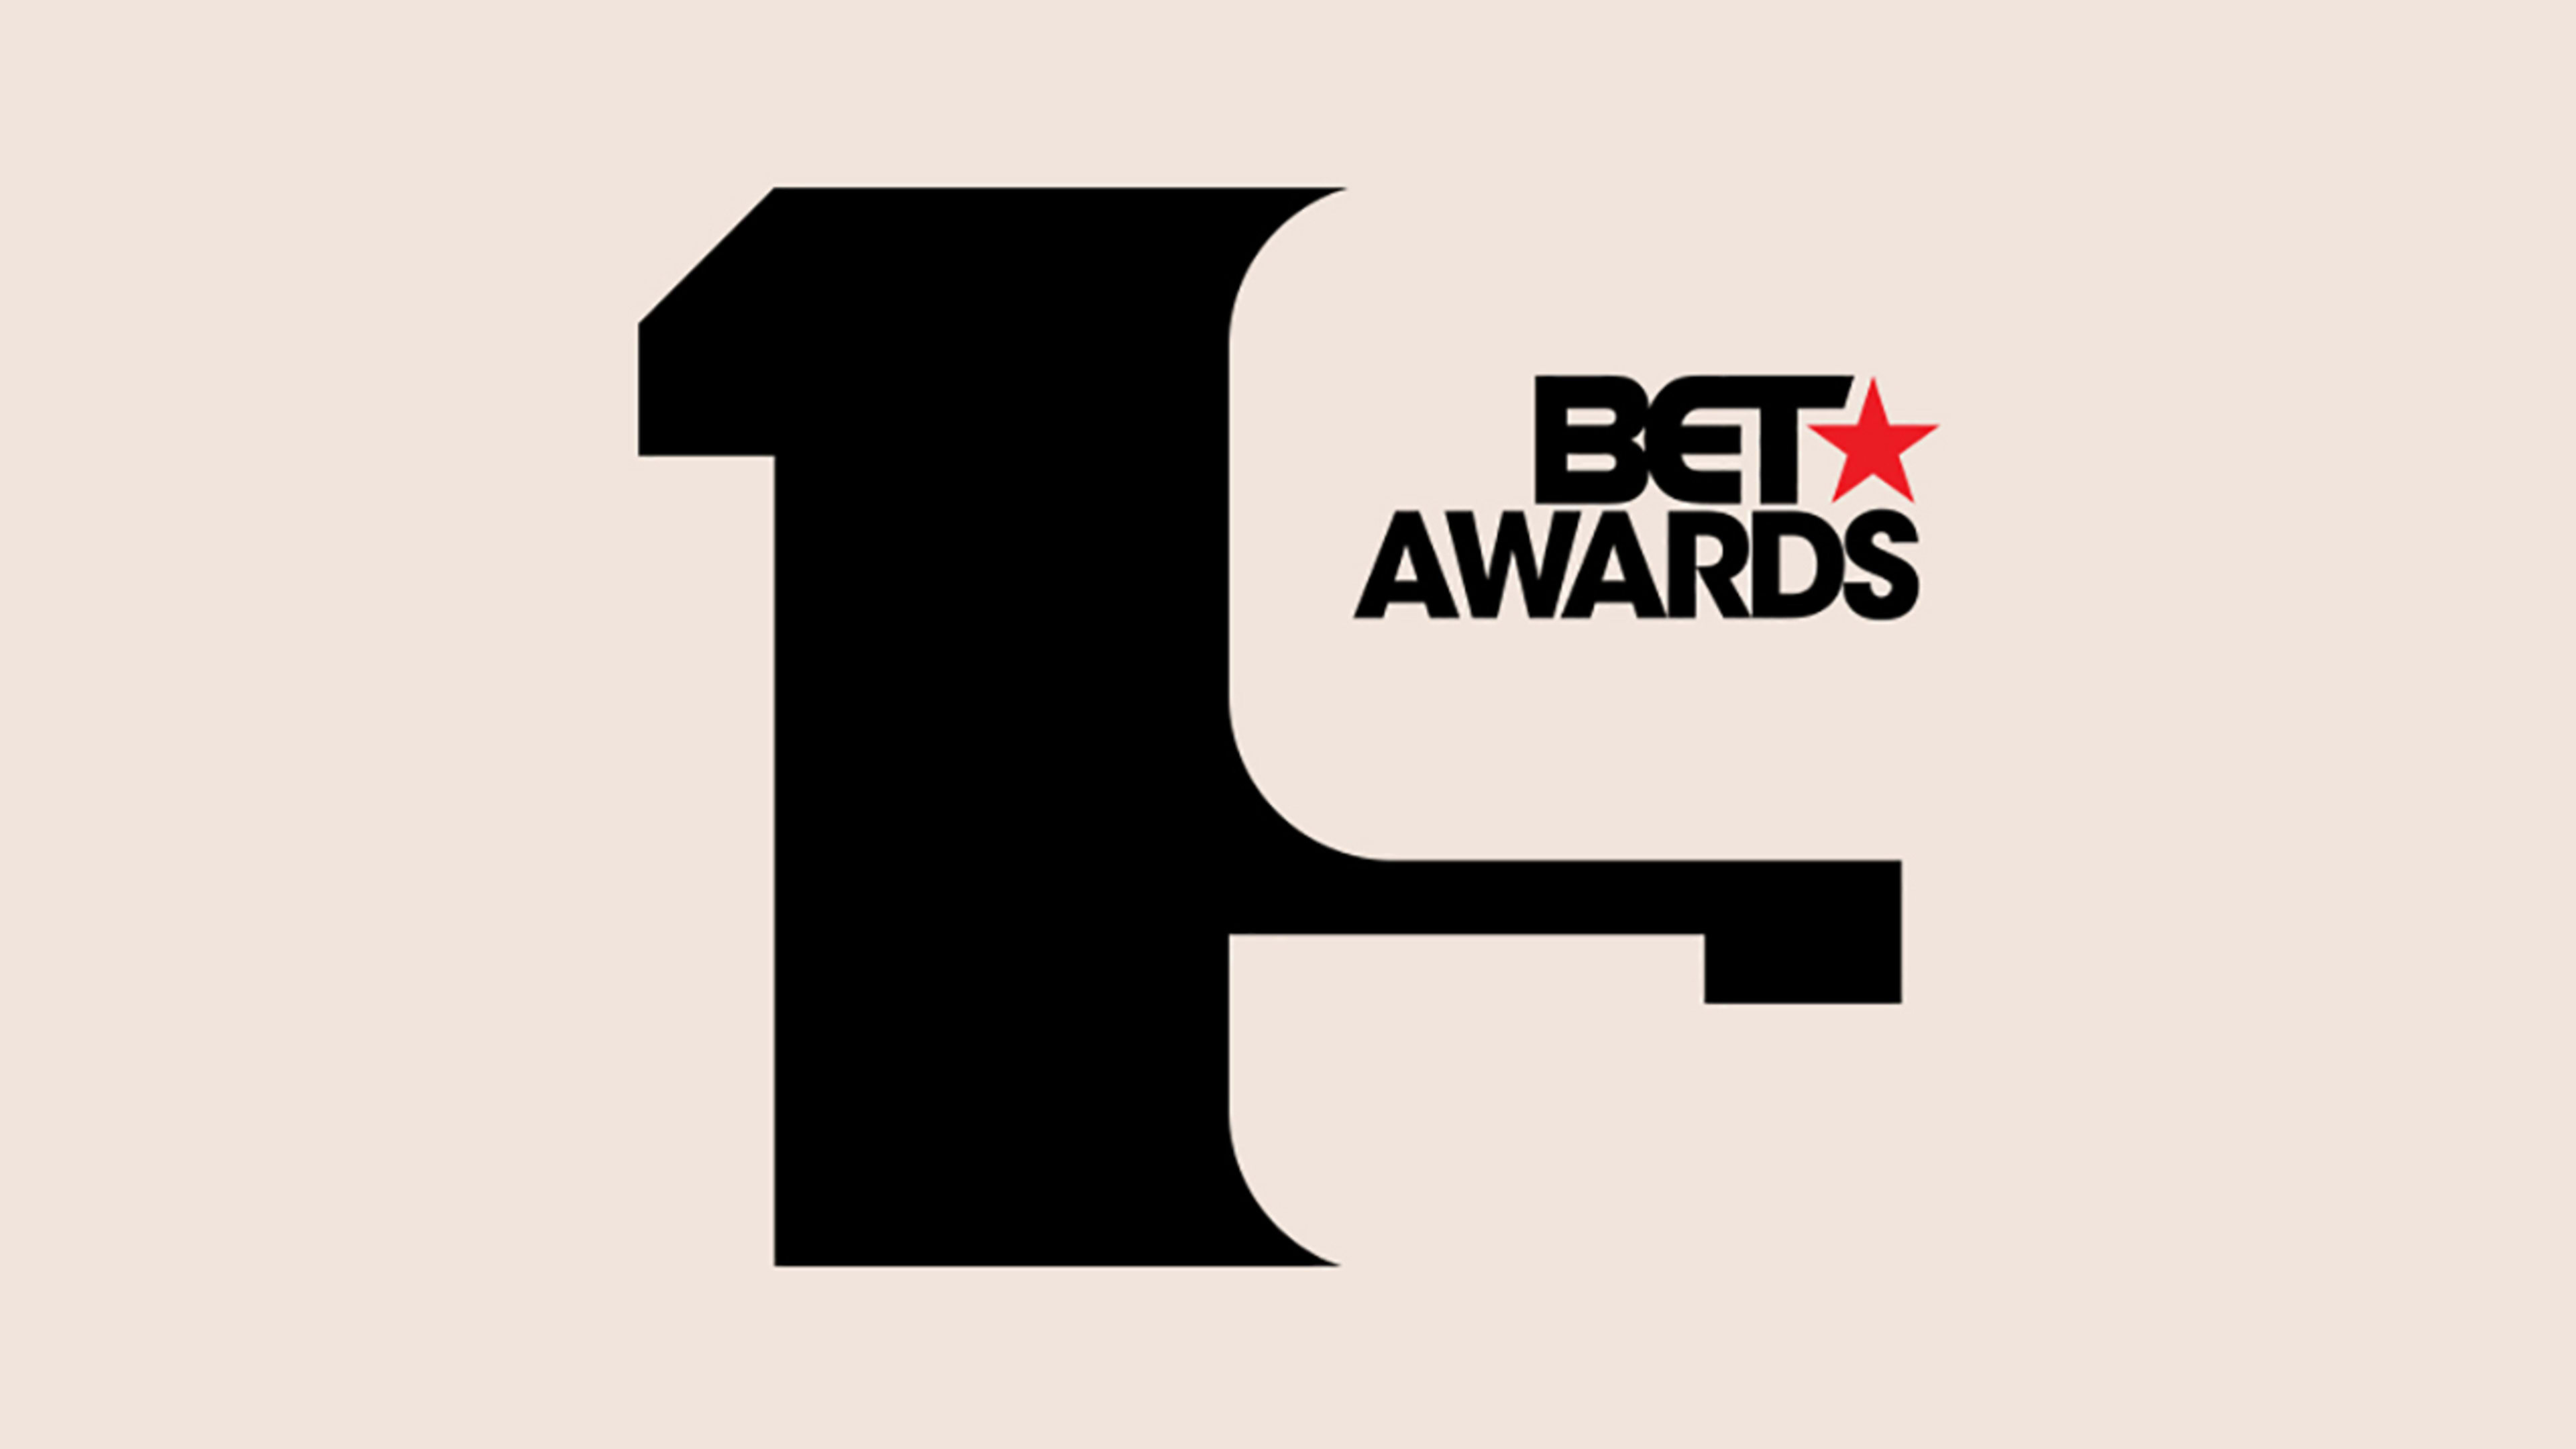 How to watch the 2019 BET Awards and red carpet live online without cable